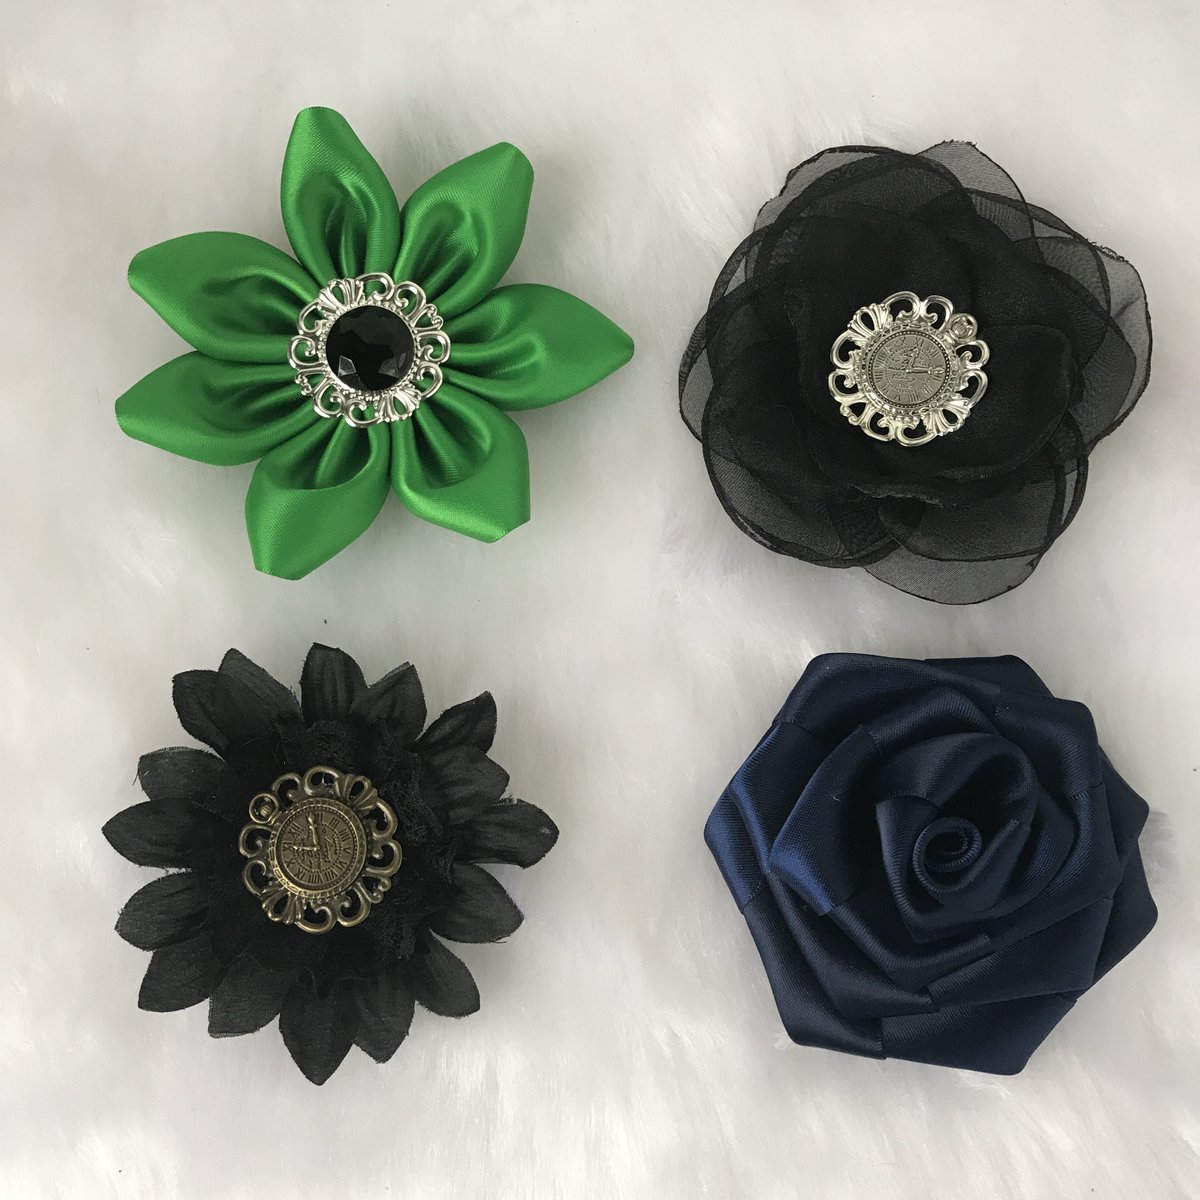 I made a bunch of handmade flowers to go on steampunk hats!  Which style is your favorite? #hatmaking #handmadeflowers #fashiondesigner #gothicbeauty #steampunkstyle #auralynne